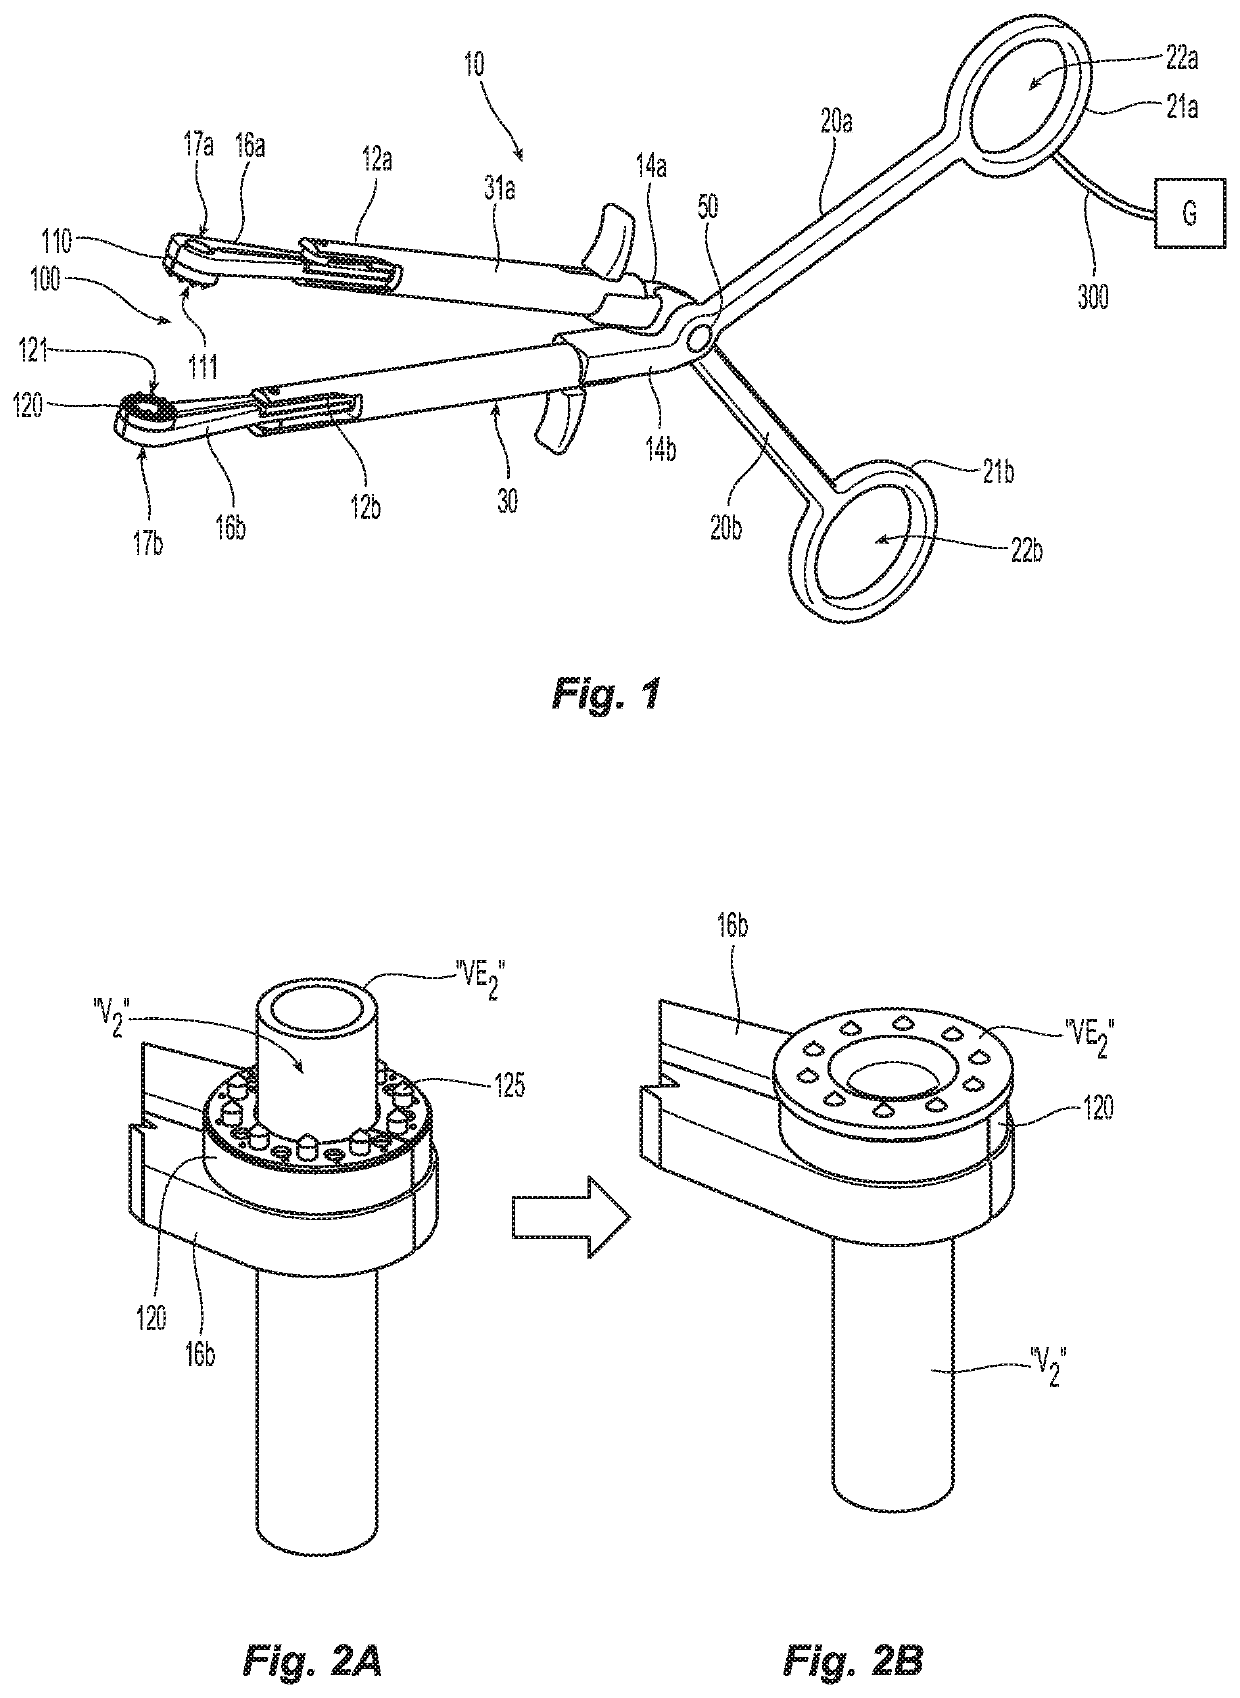 End-to-end anastomosis instrument and method